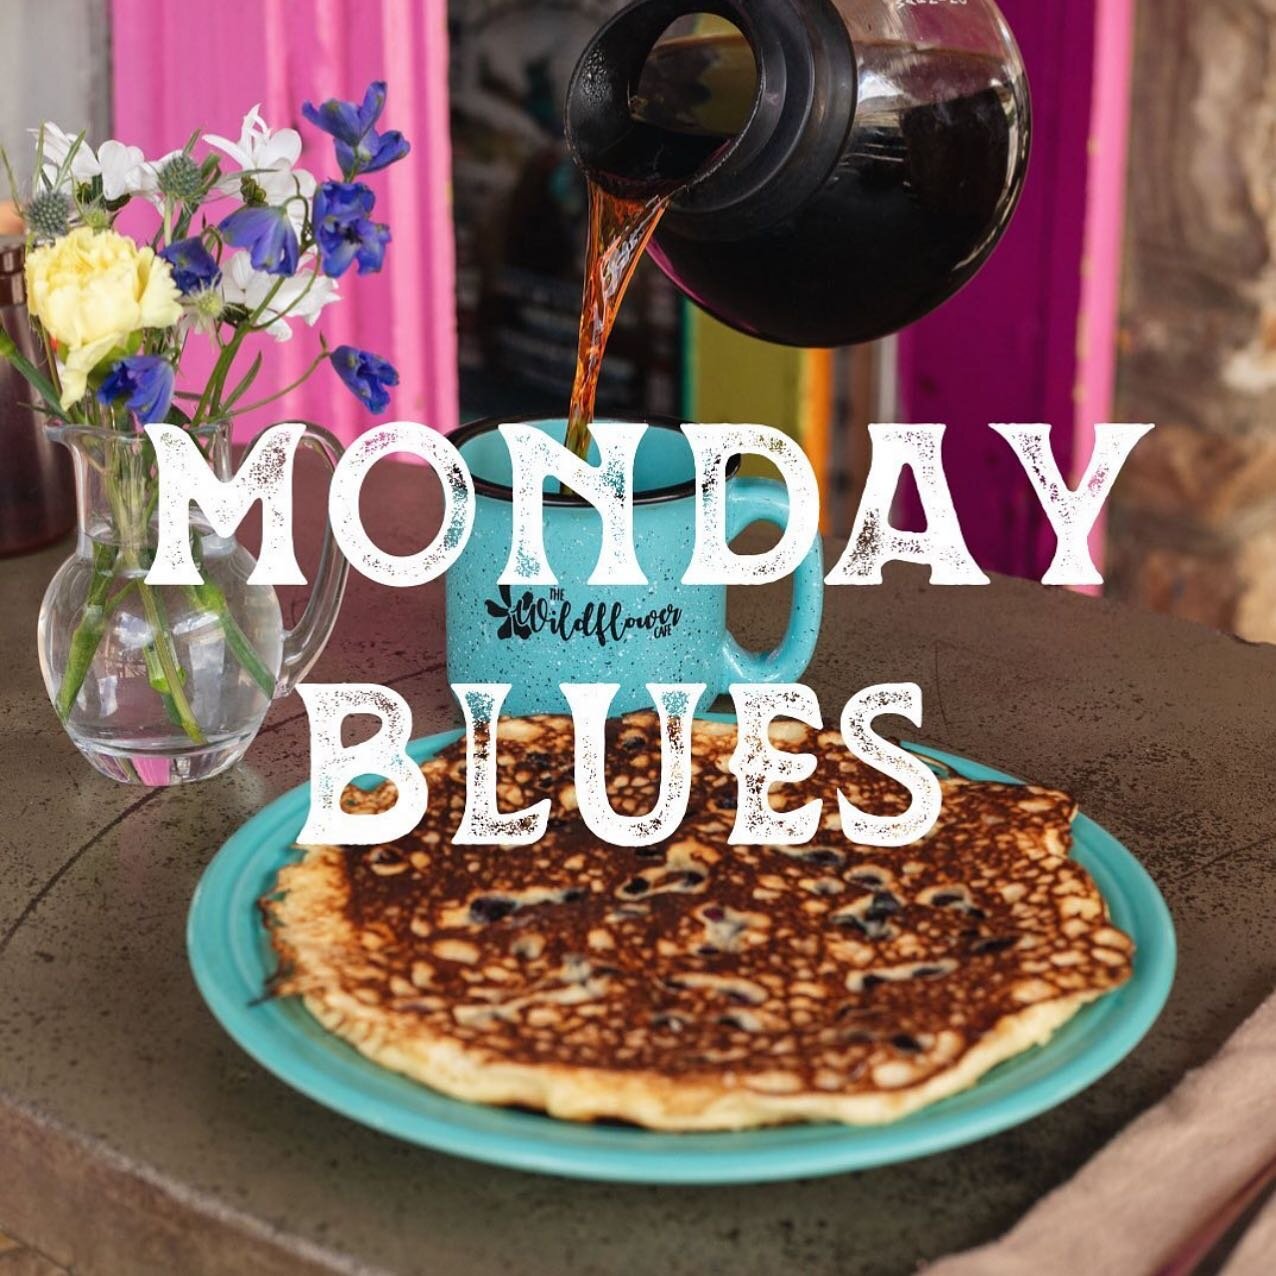 The Monday blues look a little different over here at The Wildflower Cafe 🫐 🥞 Come wake up with a hot cup of coffee and @chefthebear famous blueberry pancakes!